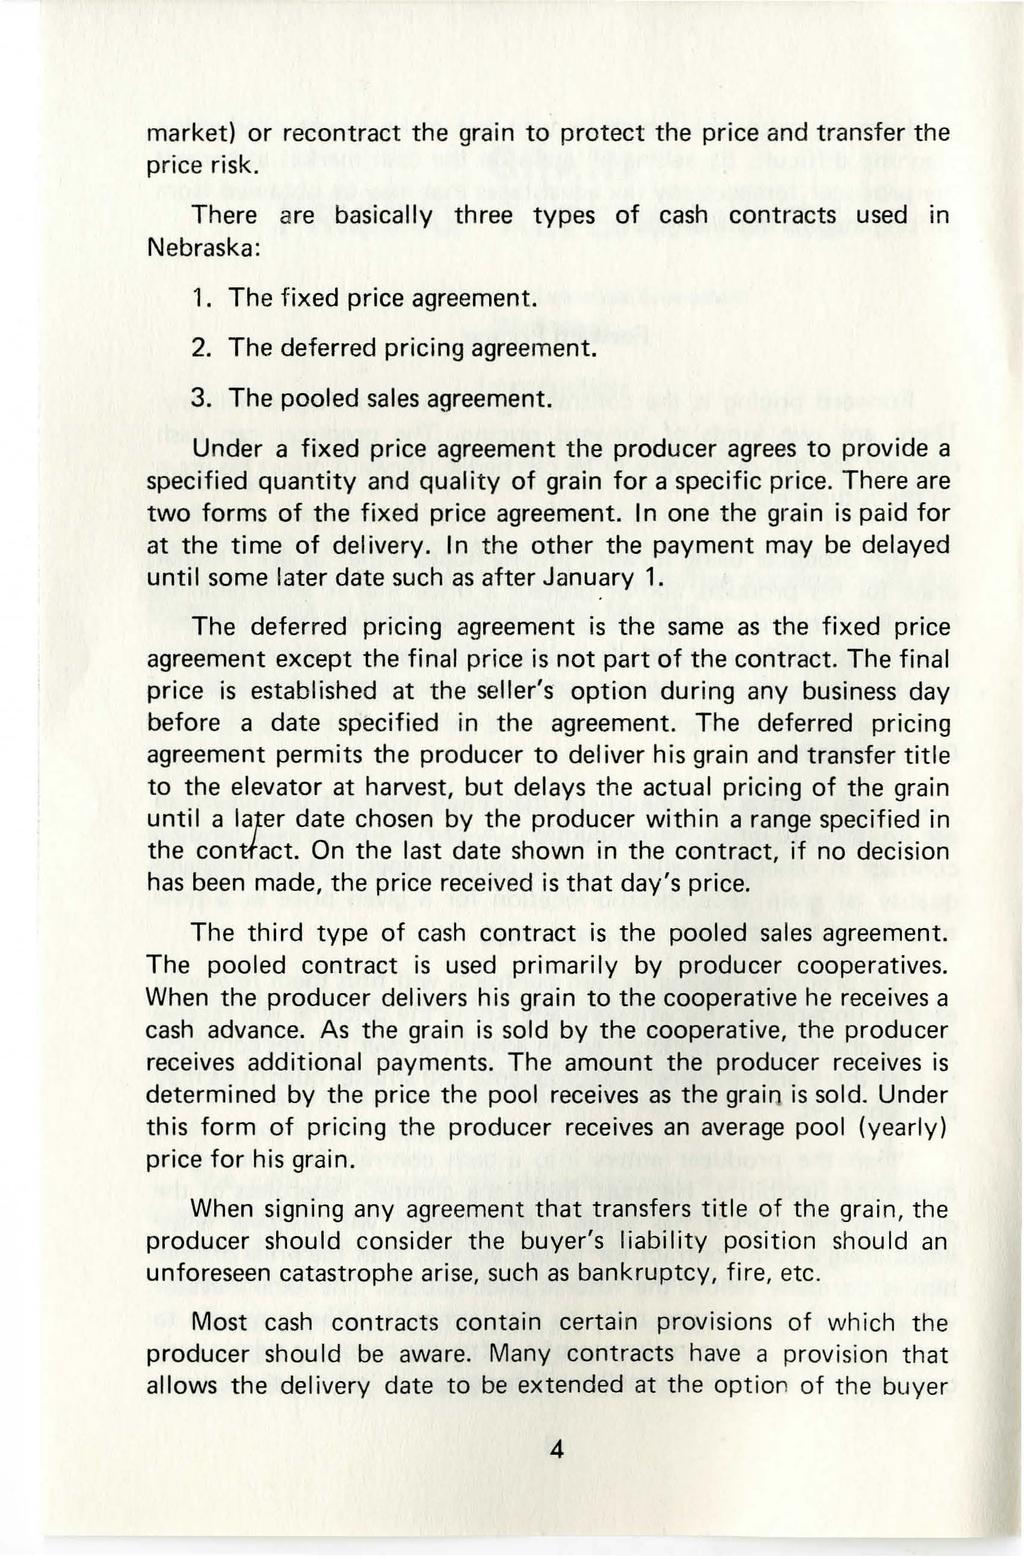 market) or recontract the grain to protect the price and transfer the price risk. There are basically three types of cash contracts used in Nebraska: 1. The fixed price agreement. 2.